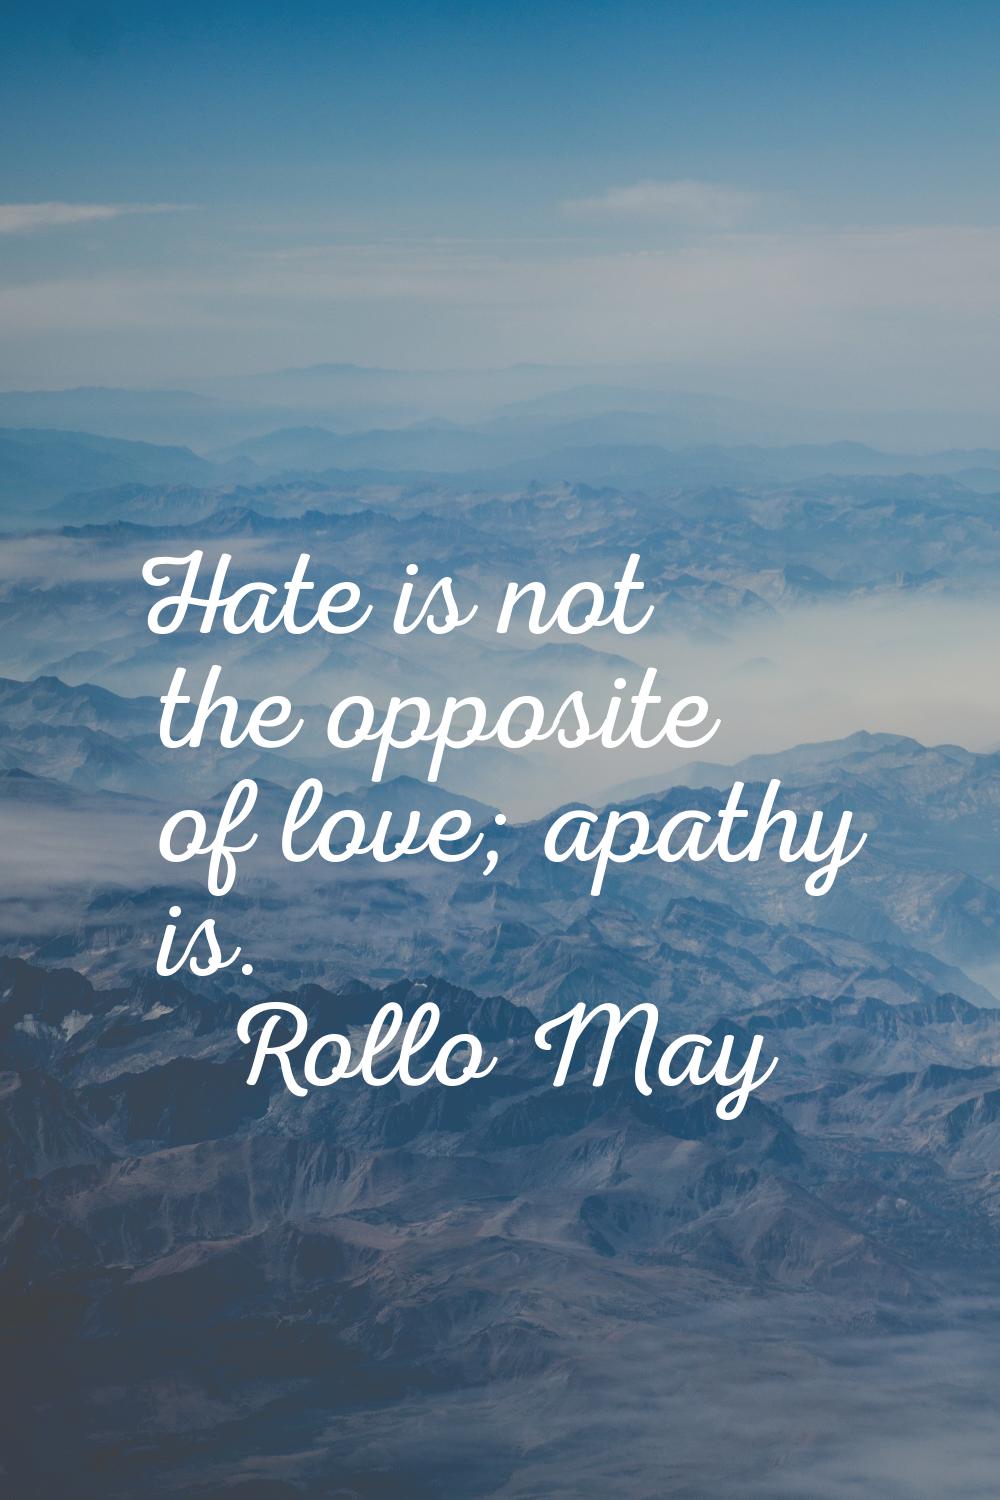 Hate is not the opposite of love; apathy is.